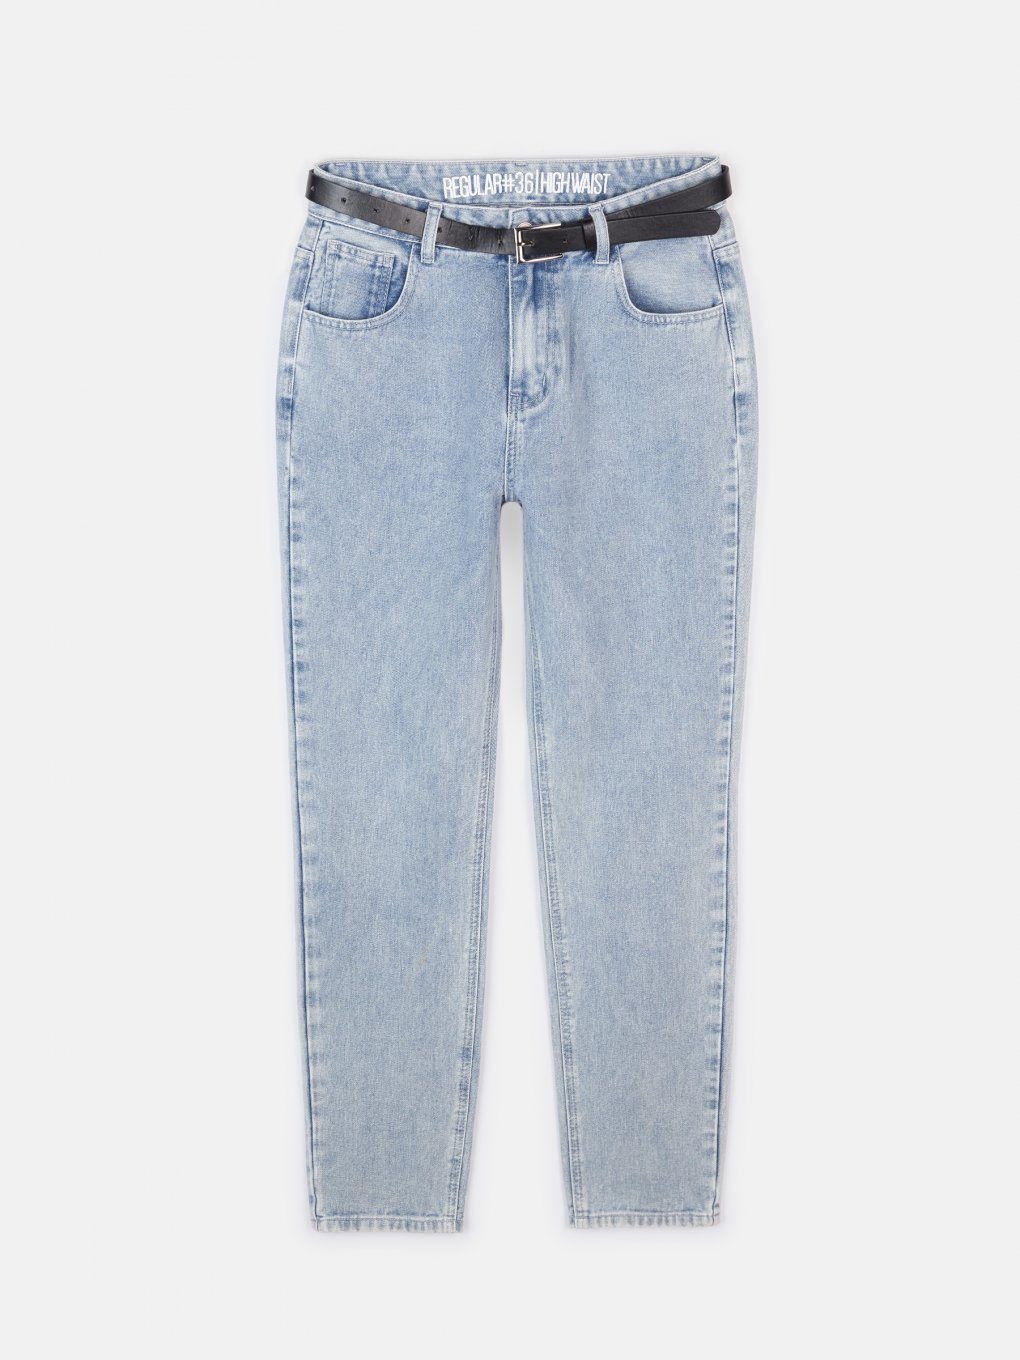 Straight leg jeans with belt